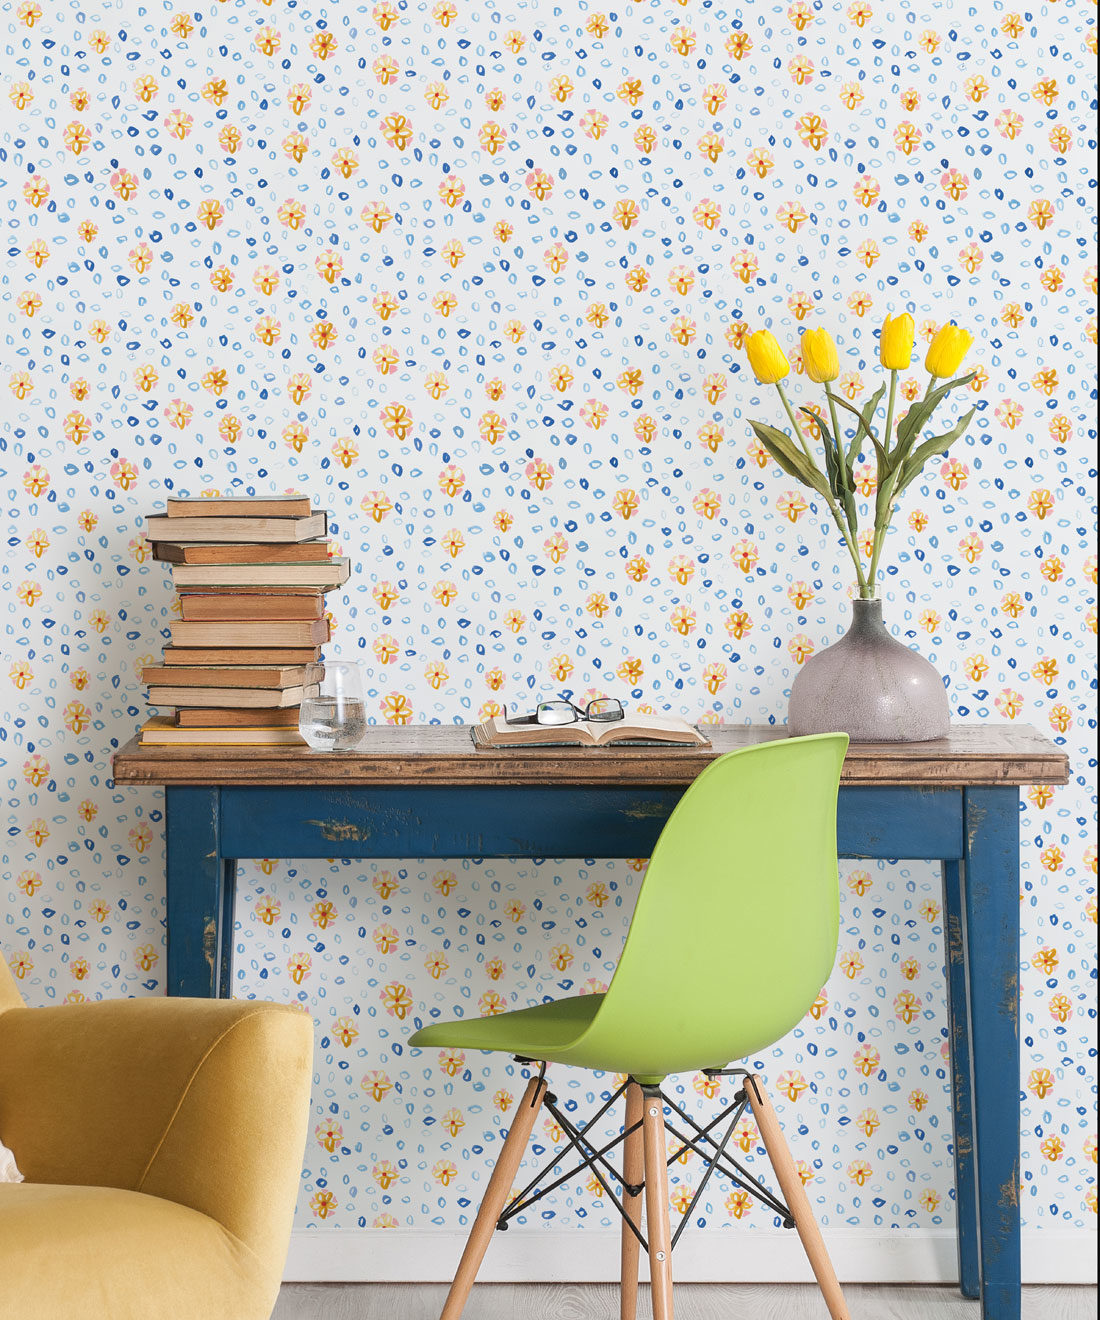 Al Hadiqa Wallpaper • Dainty Floral Design • Desk with books stacked on the left and a lime green chair in front with yellow tulips in a vase on the right side of the desk. • Milton & King Europe